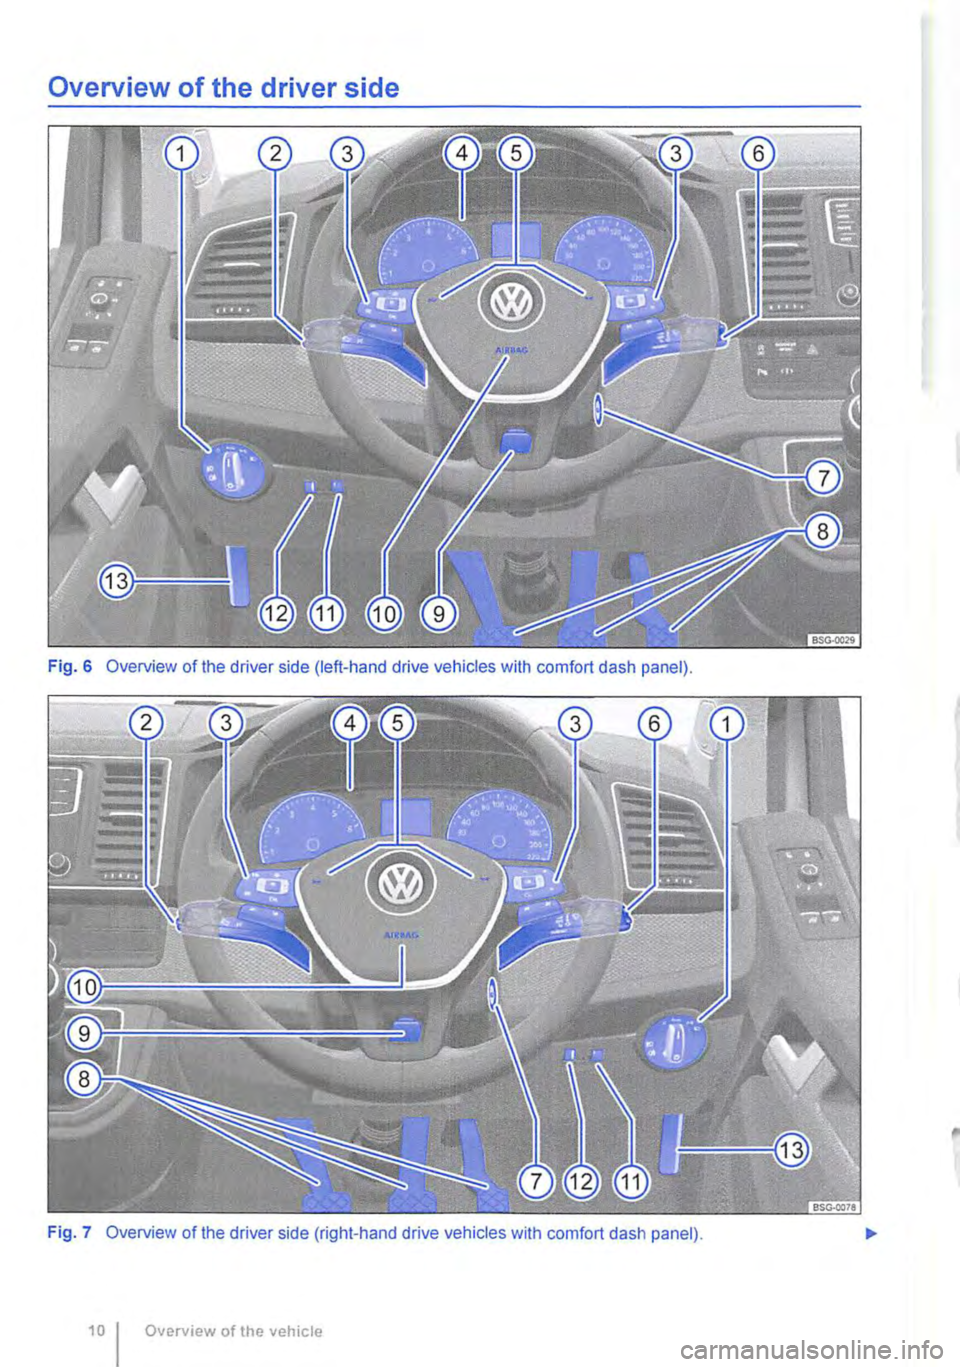 VOLKSWAGEN TRANSPORTER 2010  Owners Manual Overview of the driver side 
Fig. 6 Overview of the driver side (left-hand drive vehicles with comfort dash panel). 
Fig. 7 Overview of the driver side (right-hand drive vehicles with comfort dash pan